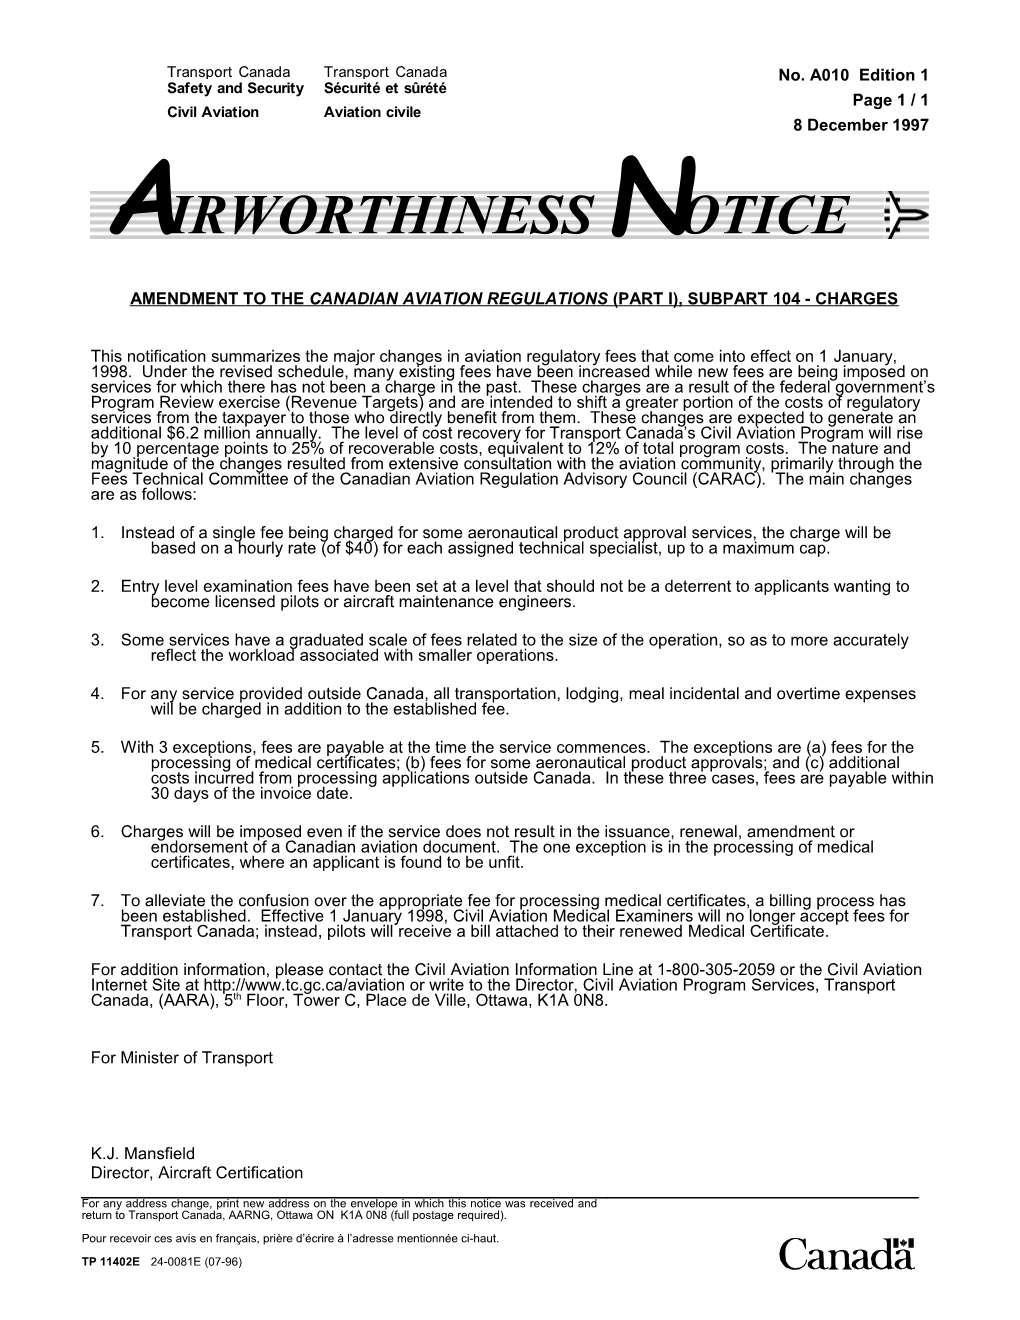 Amendment to the Canadian Aviation Regulations (Part I), Subpart 104 - Charges